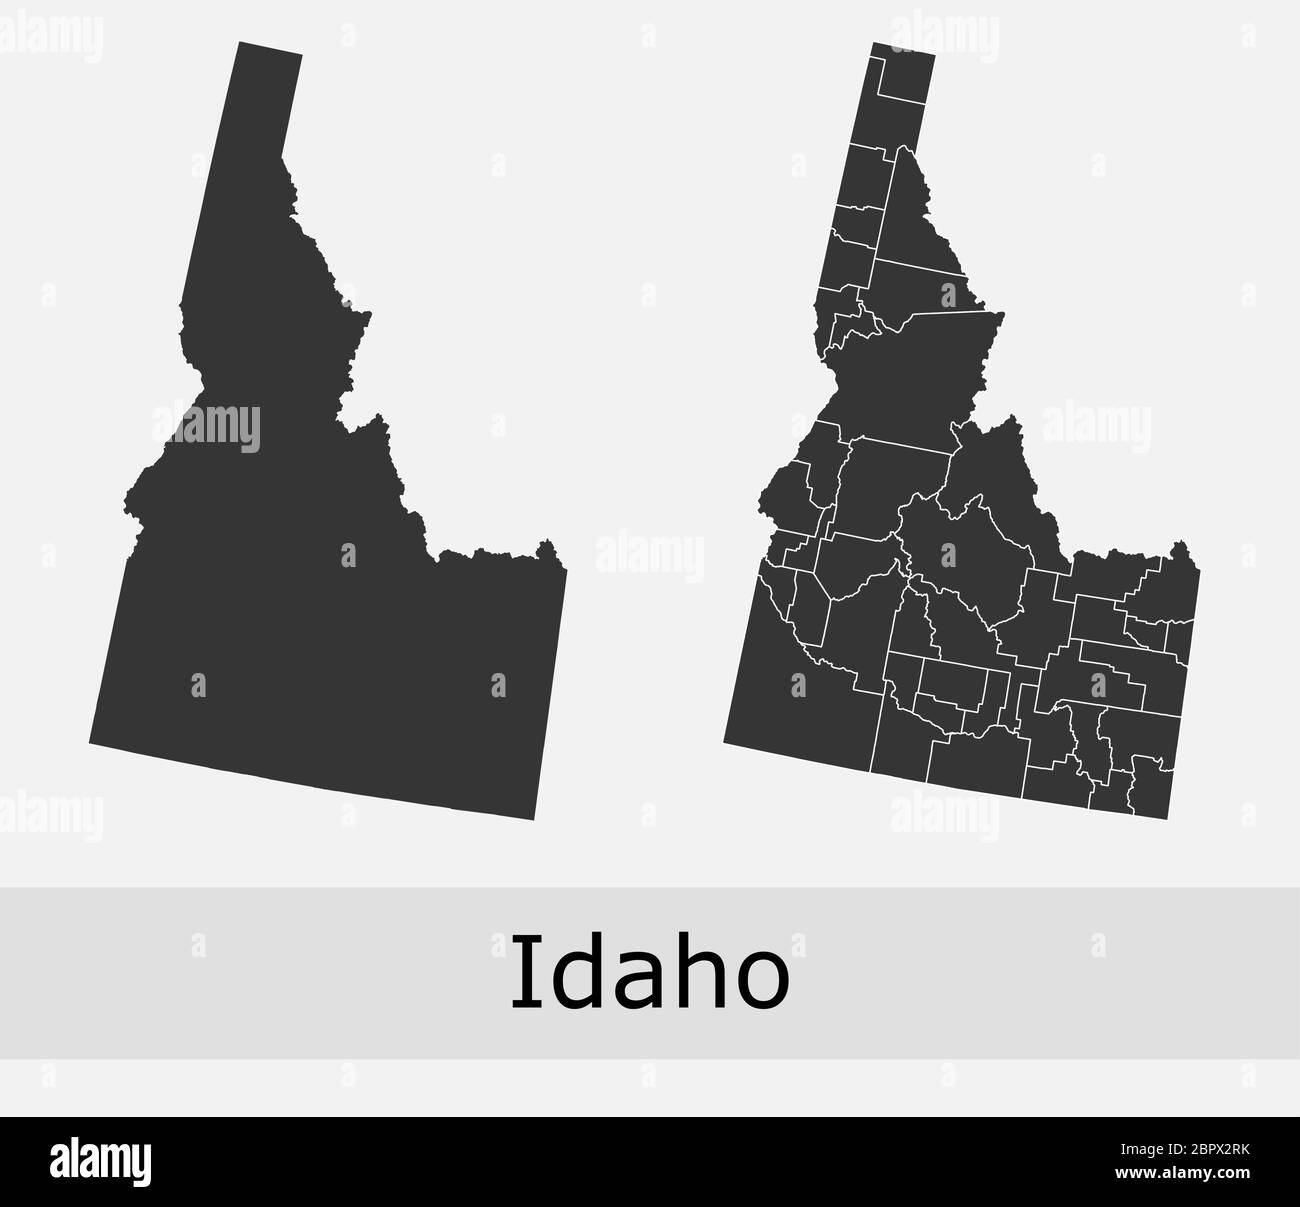 Idaho maps vector outline counties, townships, regions, municipalities, departments, borders Stock Vector